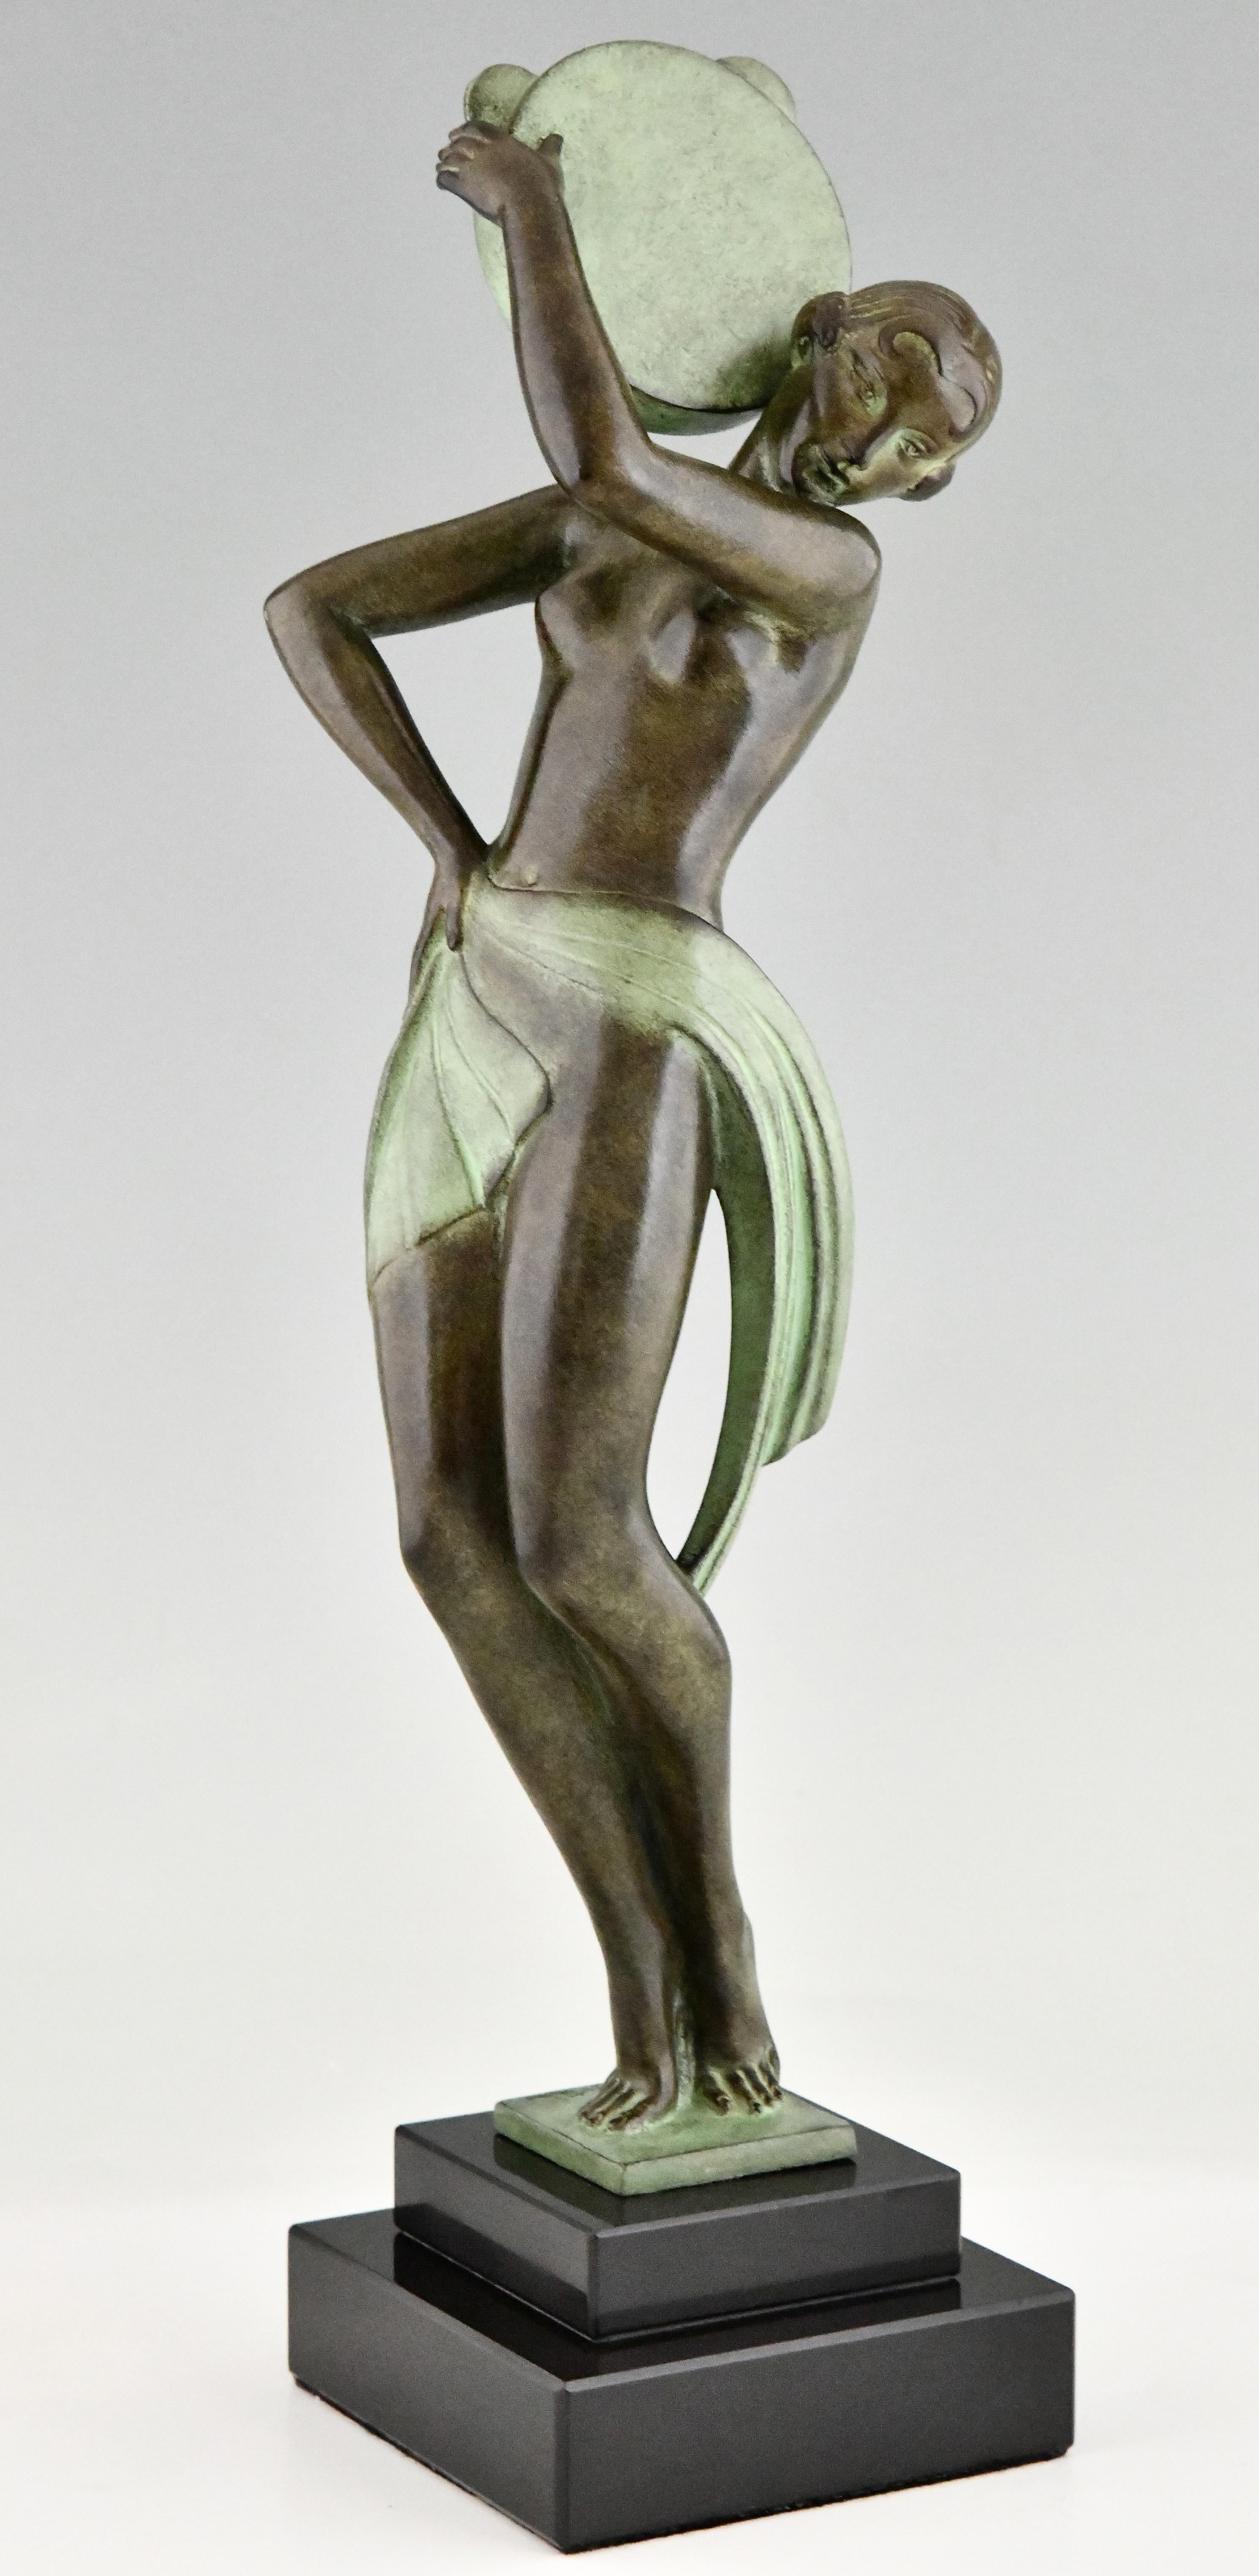 Art Deco style sculpture dancer with tambourine FARANDOLLE by Fayral, pseudonym of Pierre Le Faguays.
With the Max Le Verrier foundry seal. 
Patinated Art Metal on a black marble base. 
Design 1930. 
Posthumous contemporary cast.
With Certificate of